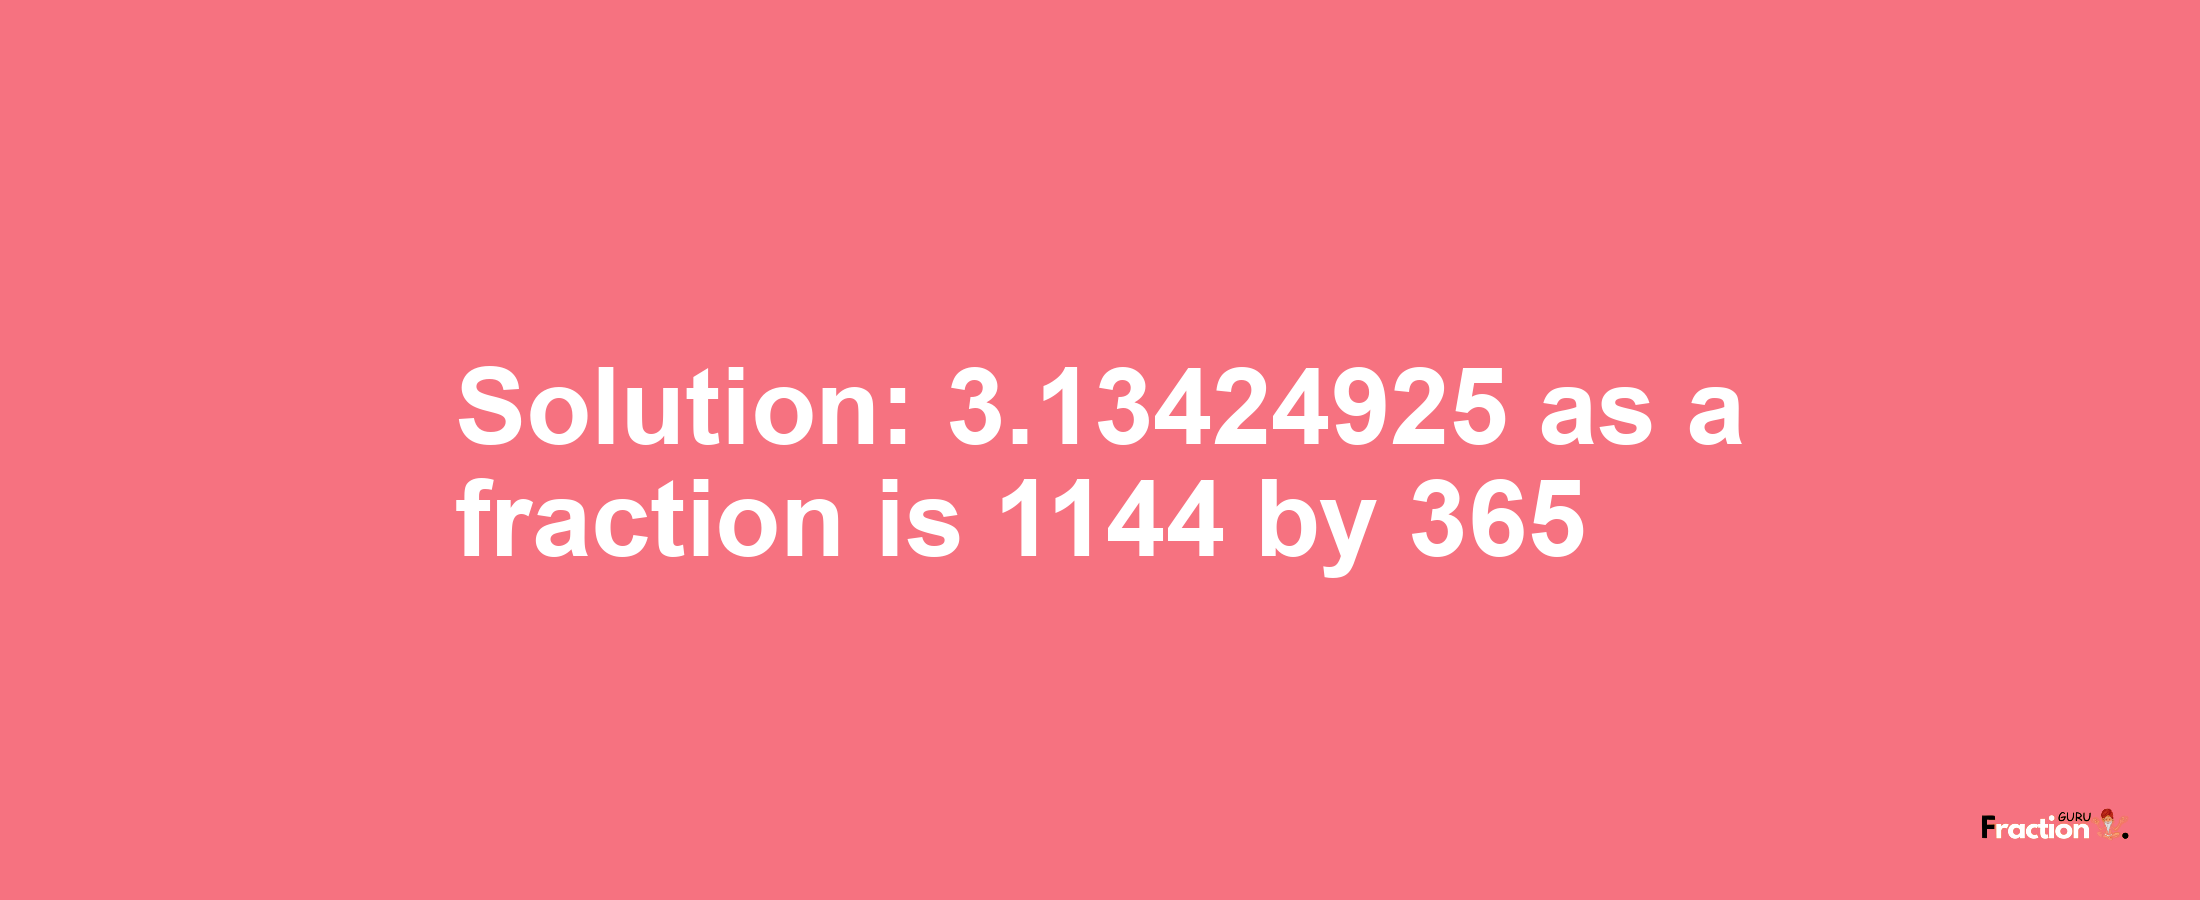 Solution:3.13424925 as a fraction is 1144/365